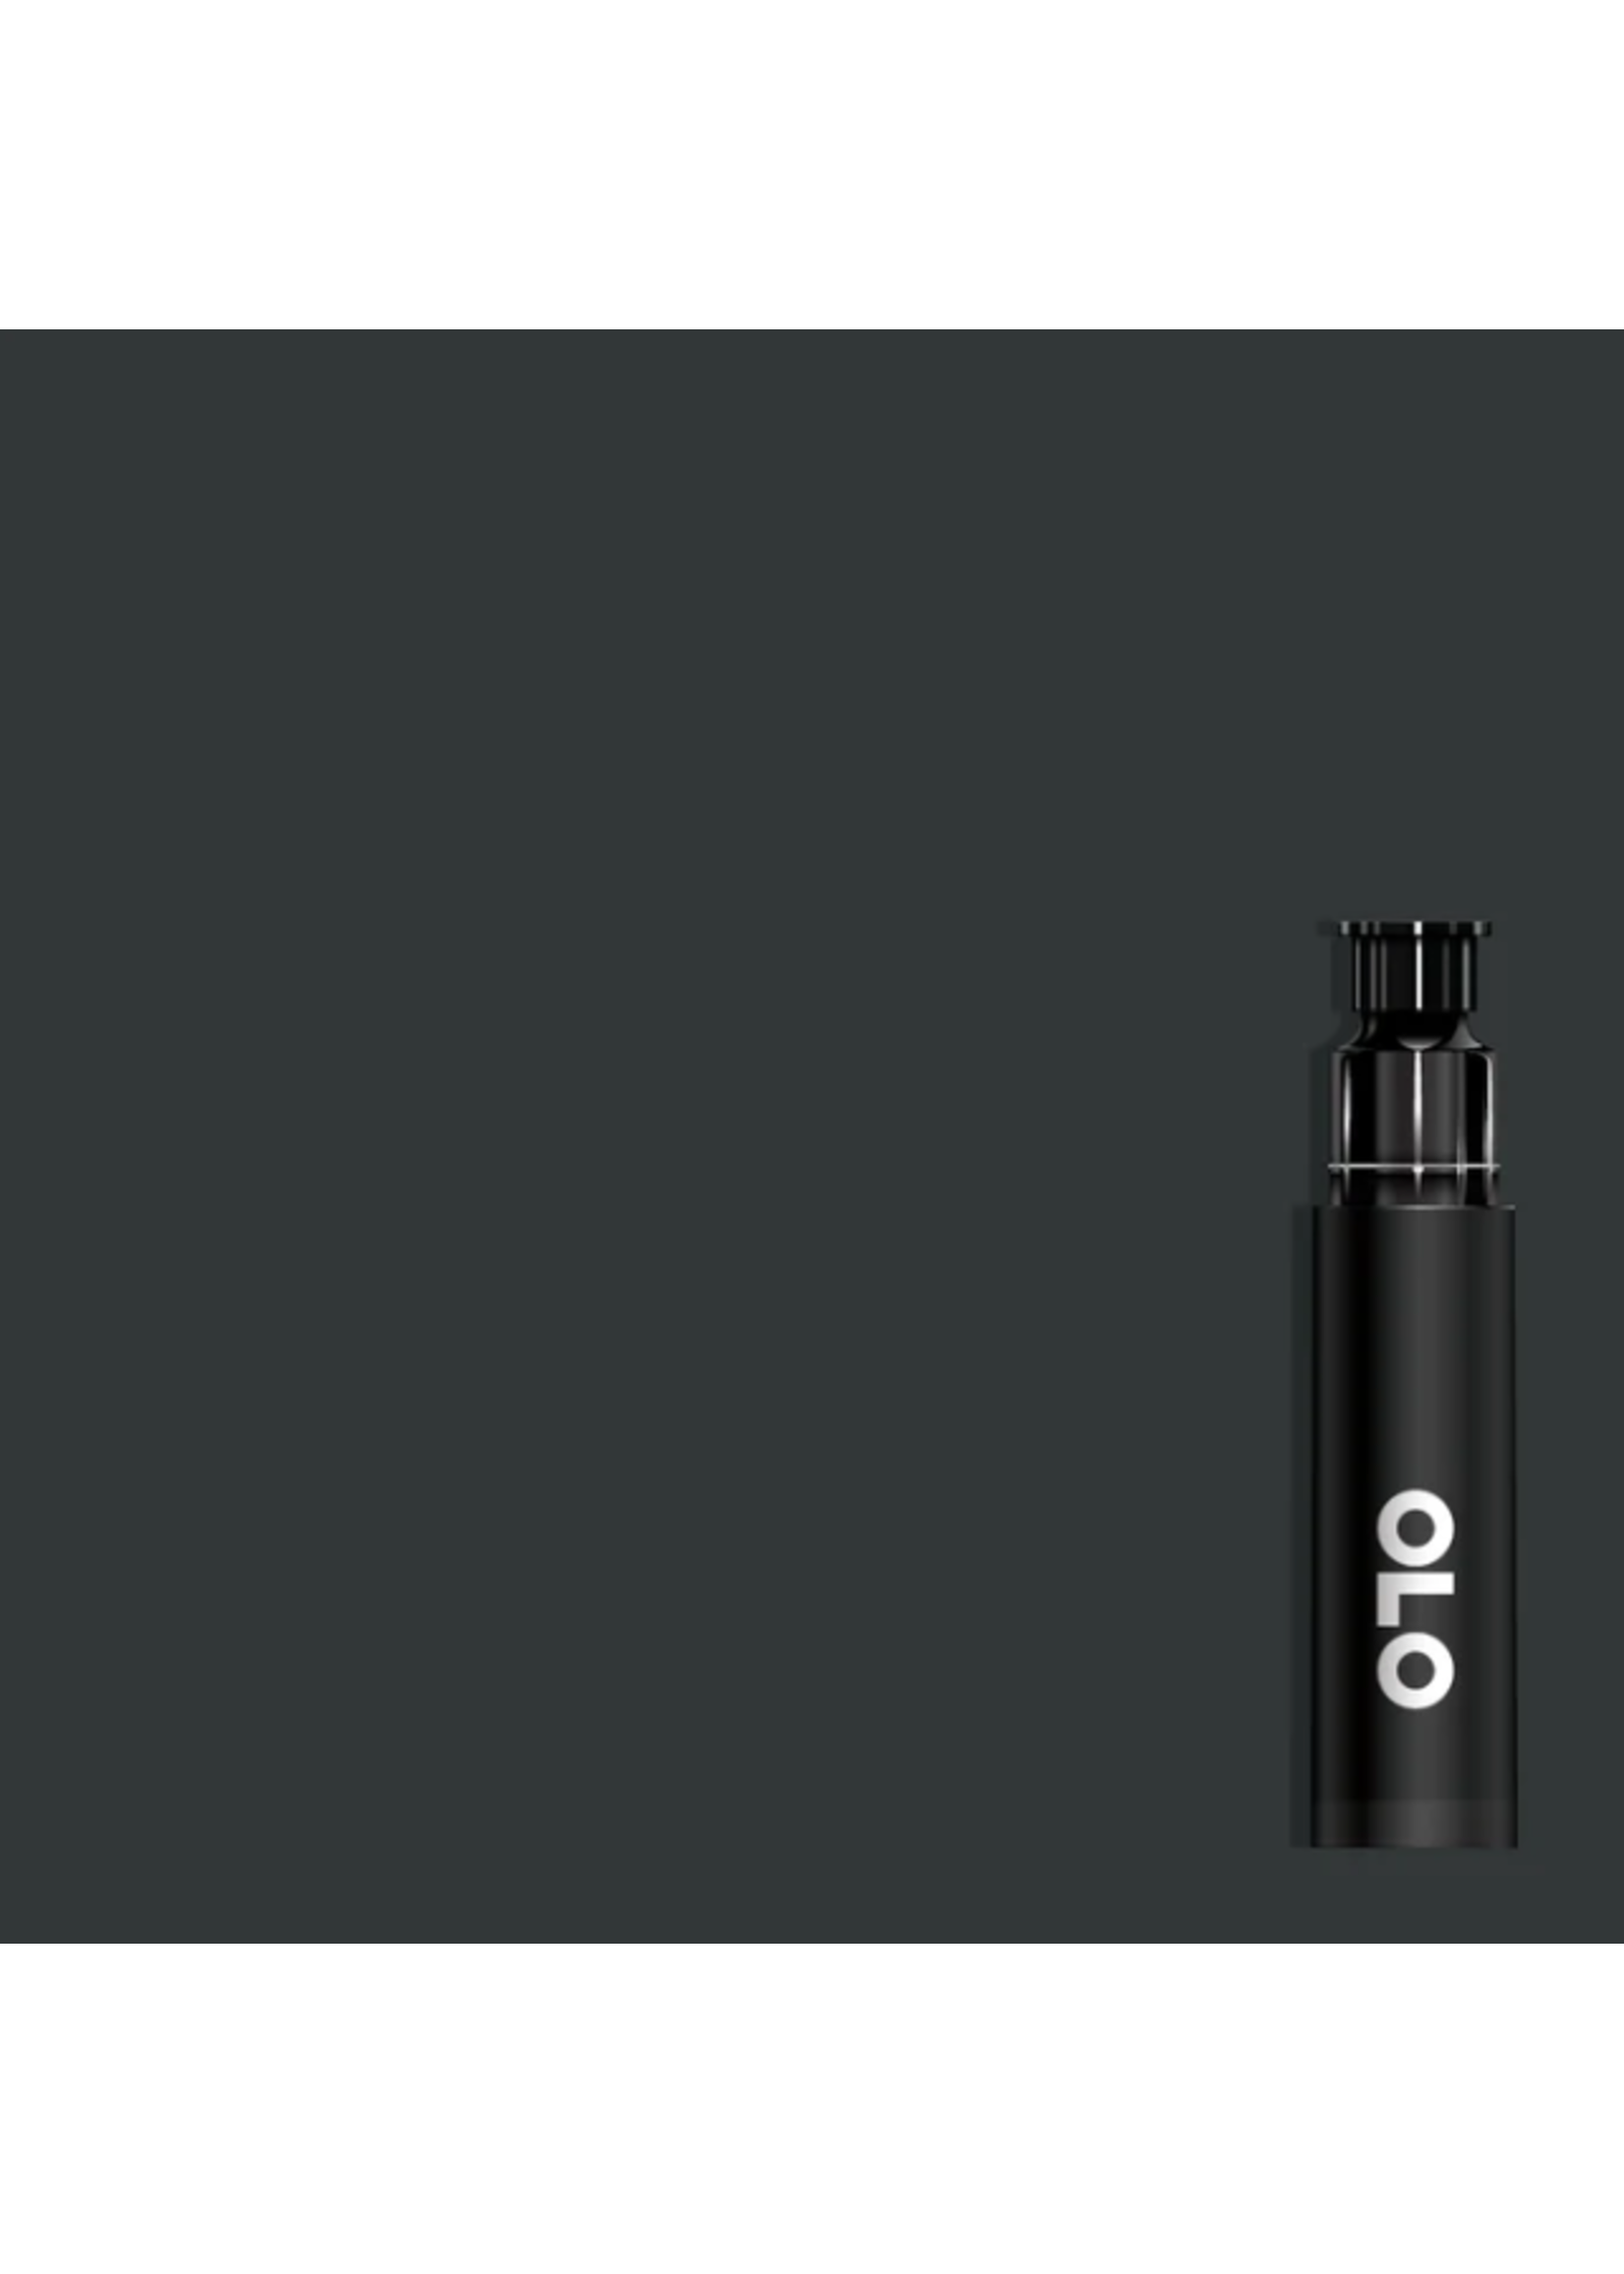 OLO OLO Brush Replacement Cartridge: Cool Gray 7